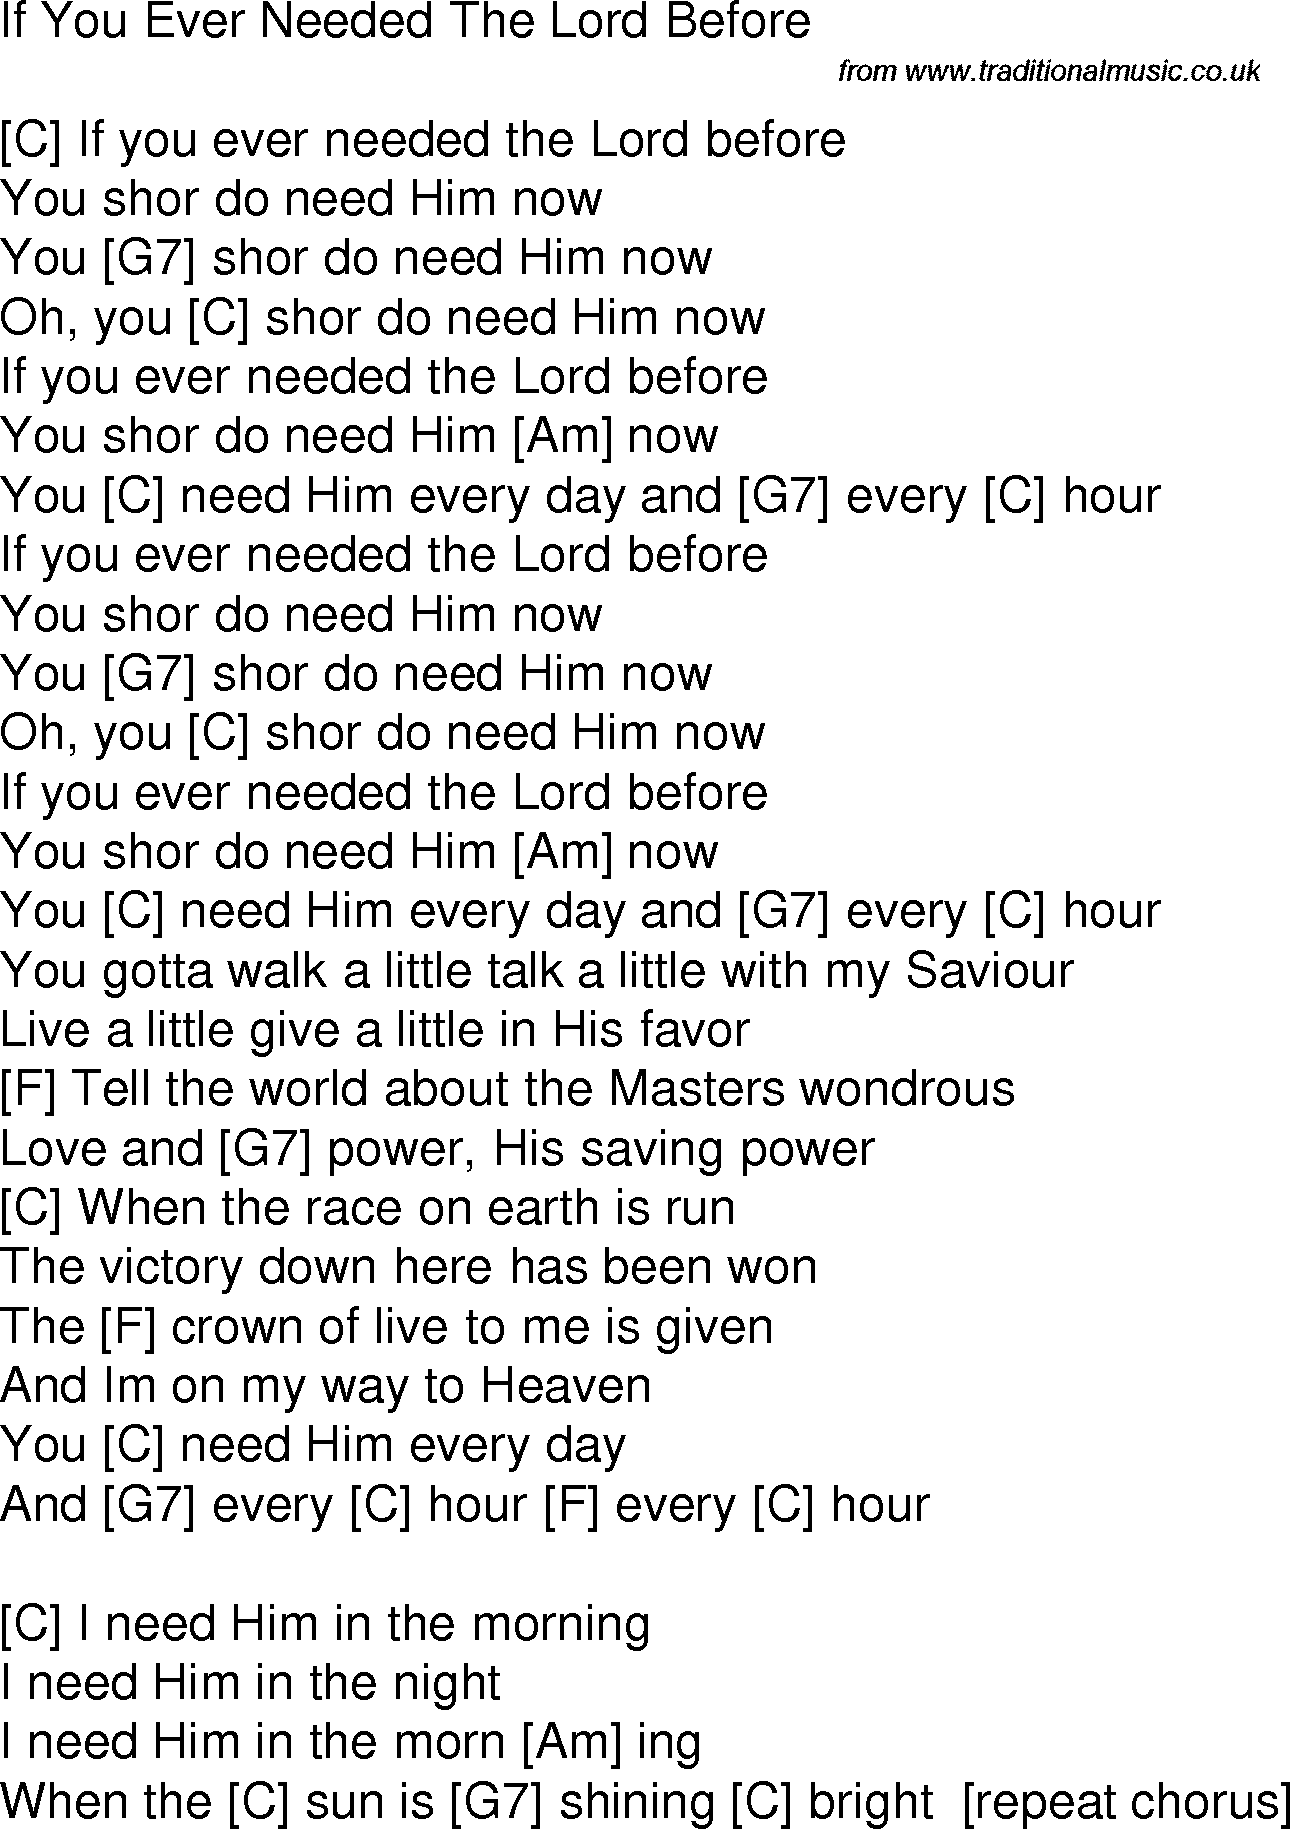 Old time song lyrics with chords for If You Ever Needed The Lord Before C